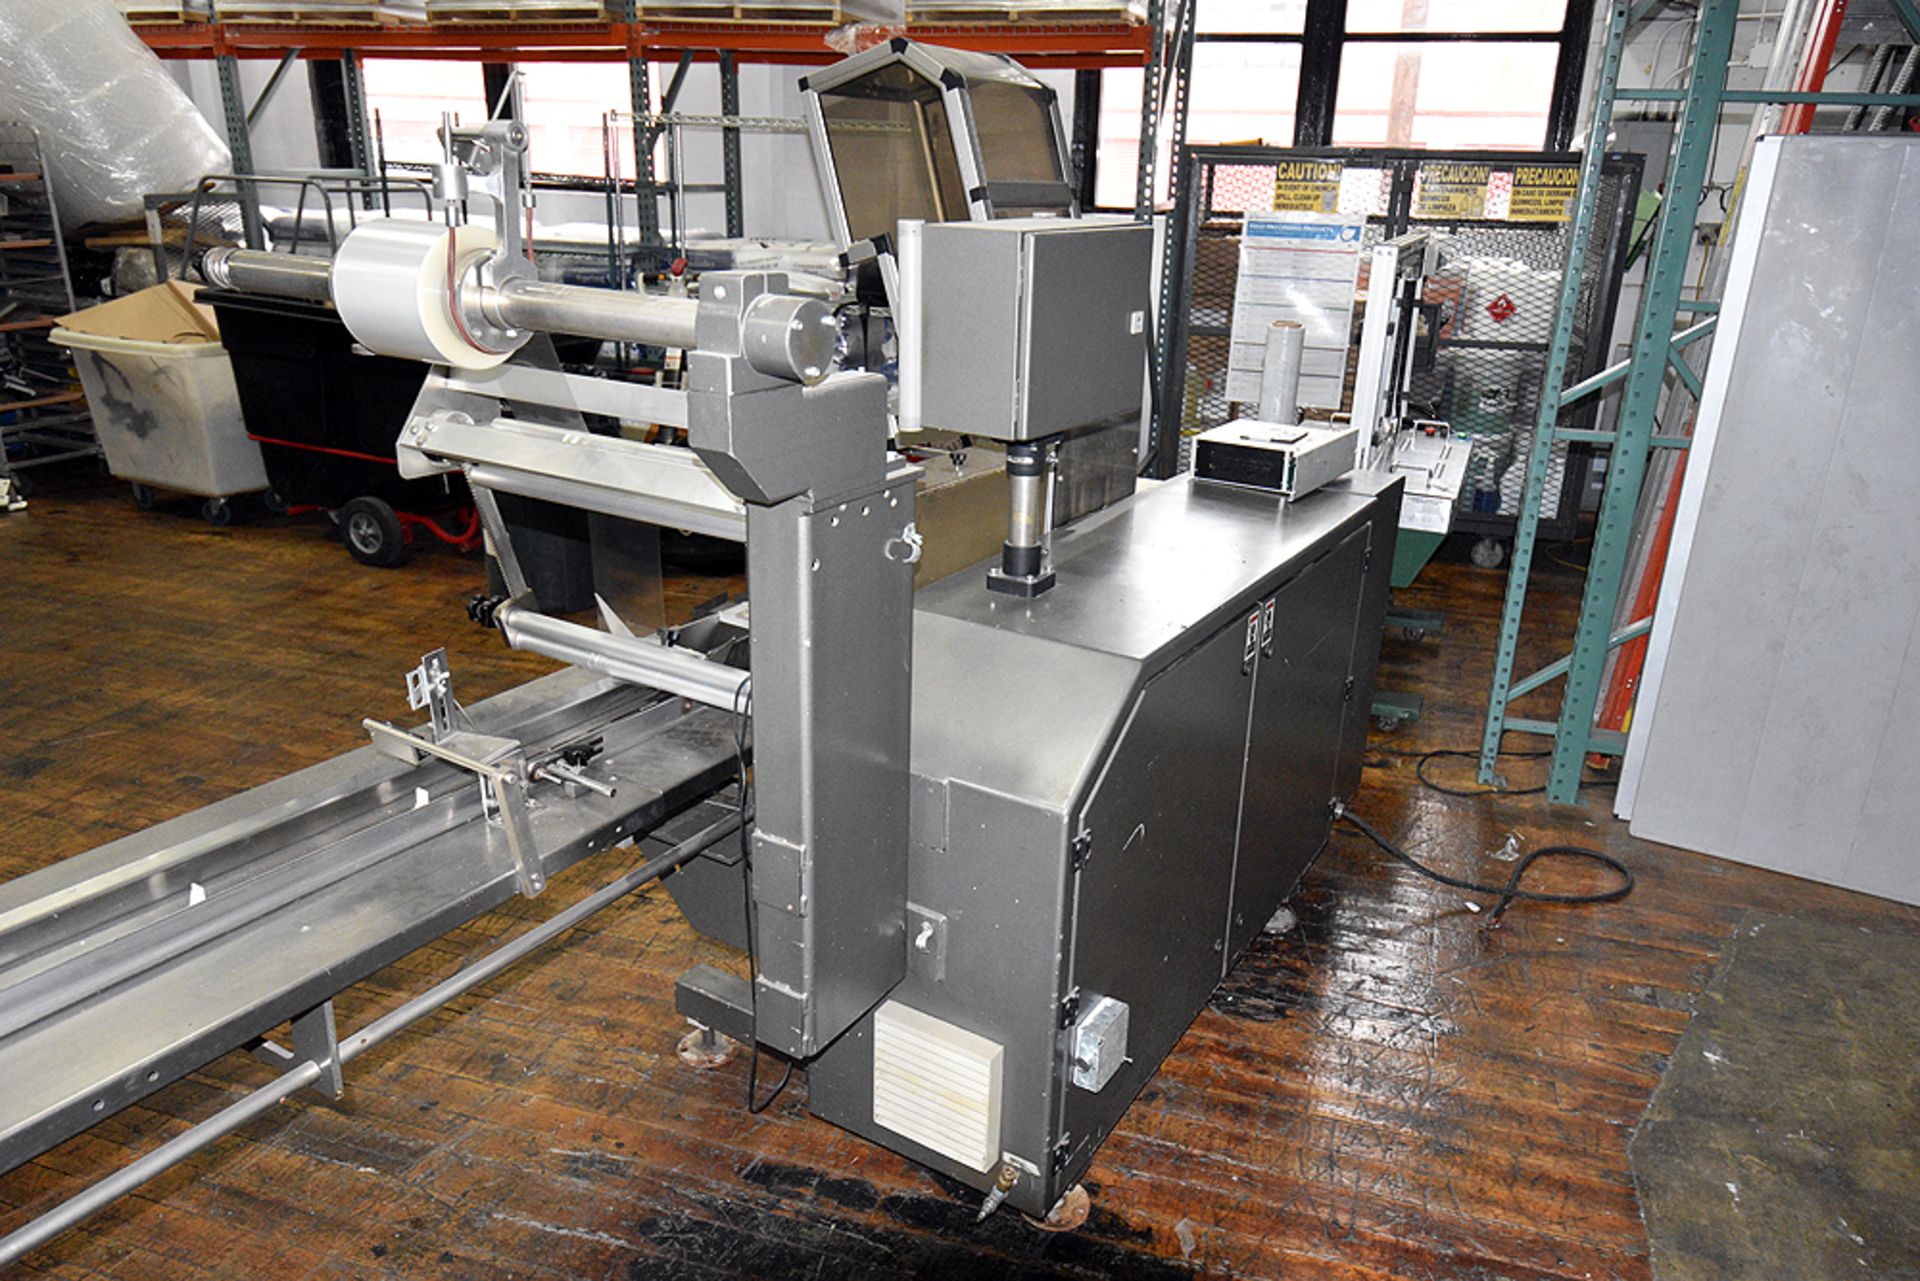 Sasib WE-150 Multi-Axis Horizontal Flo-Wrapper Line w/Attachments (See Pictures for Reference) - Image 9 of 20